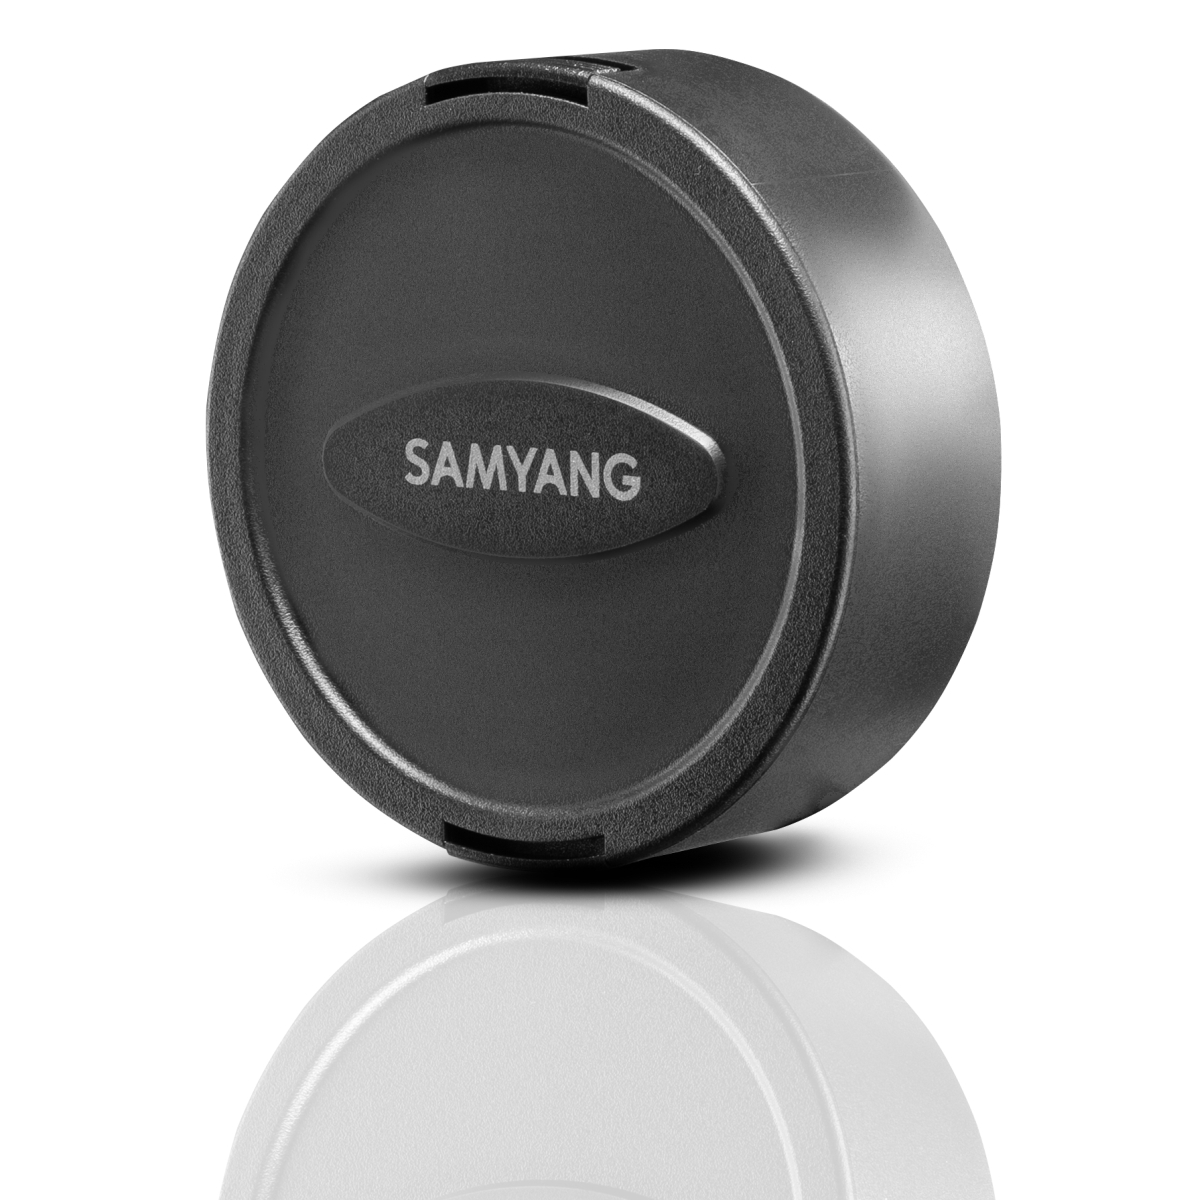 Samyang Front Cap for MF 8mm F2,8 and 8mm T3,1